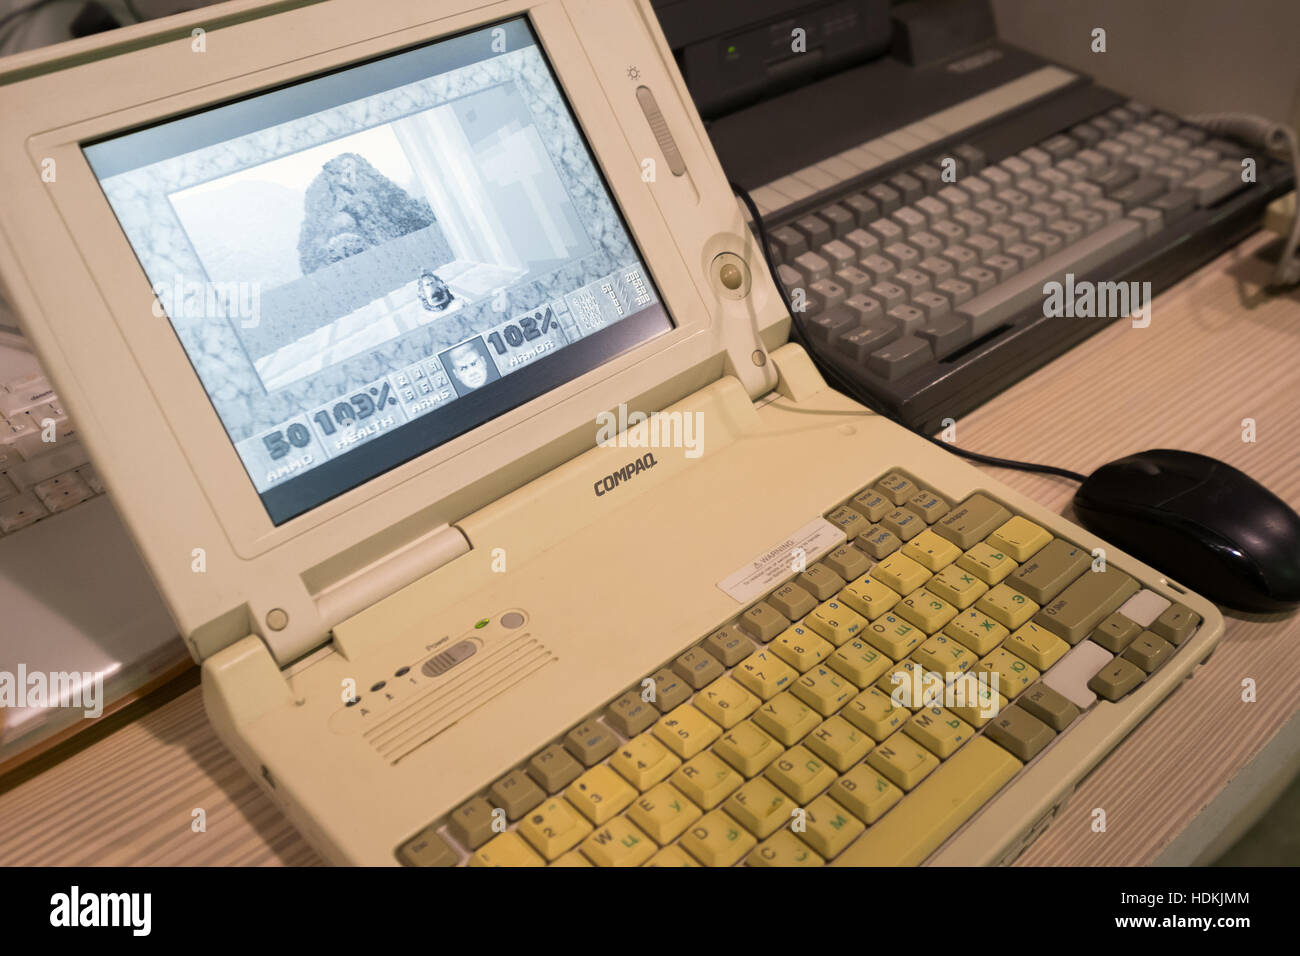 Working retro pc and laptops with vintage games Stock Photo